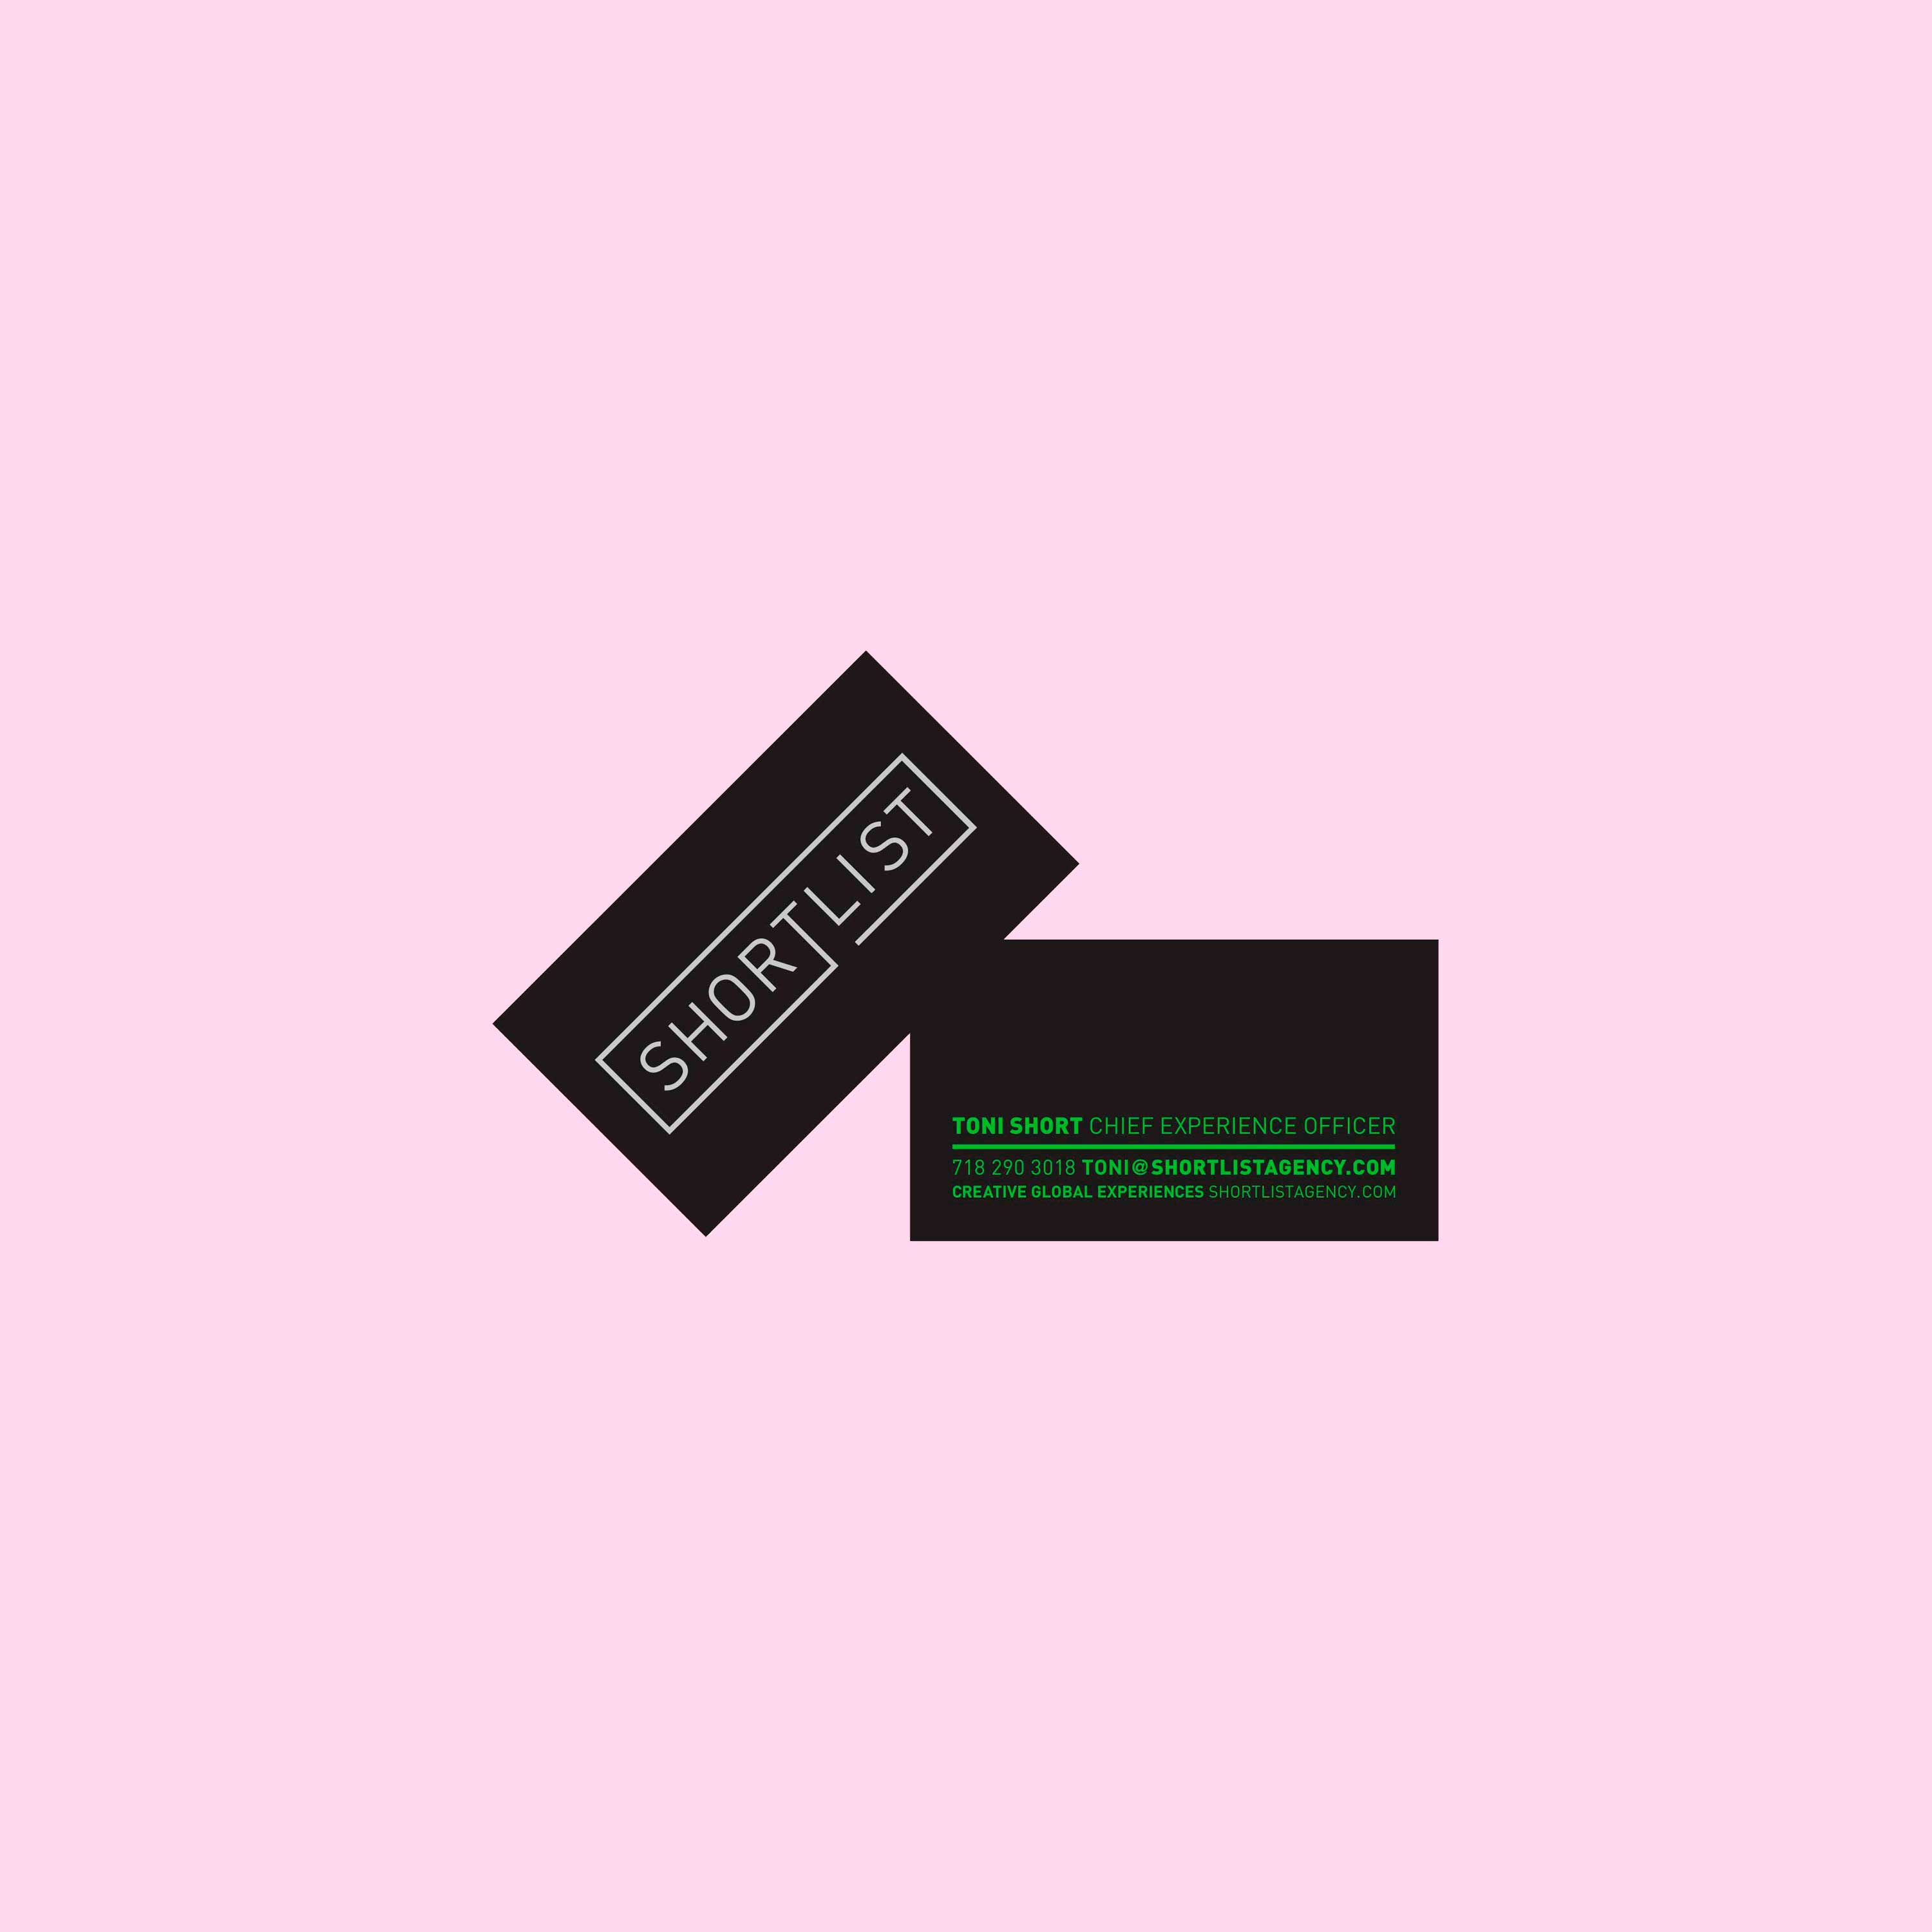 Business card design for Shortlist Agency in New York